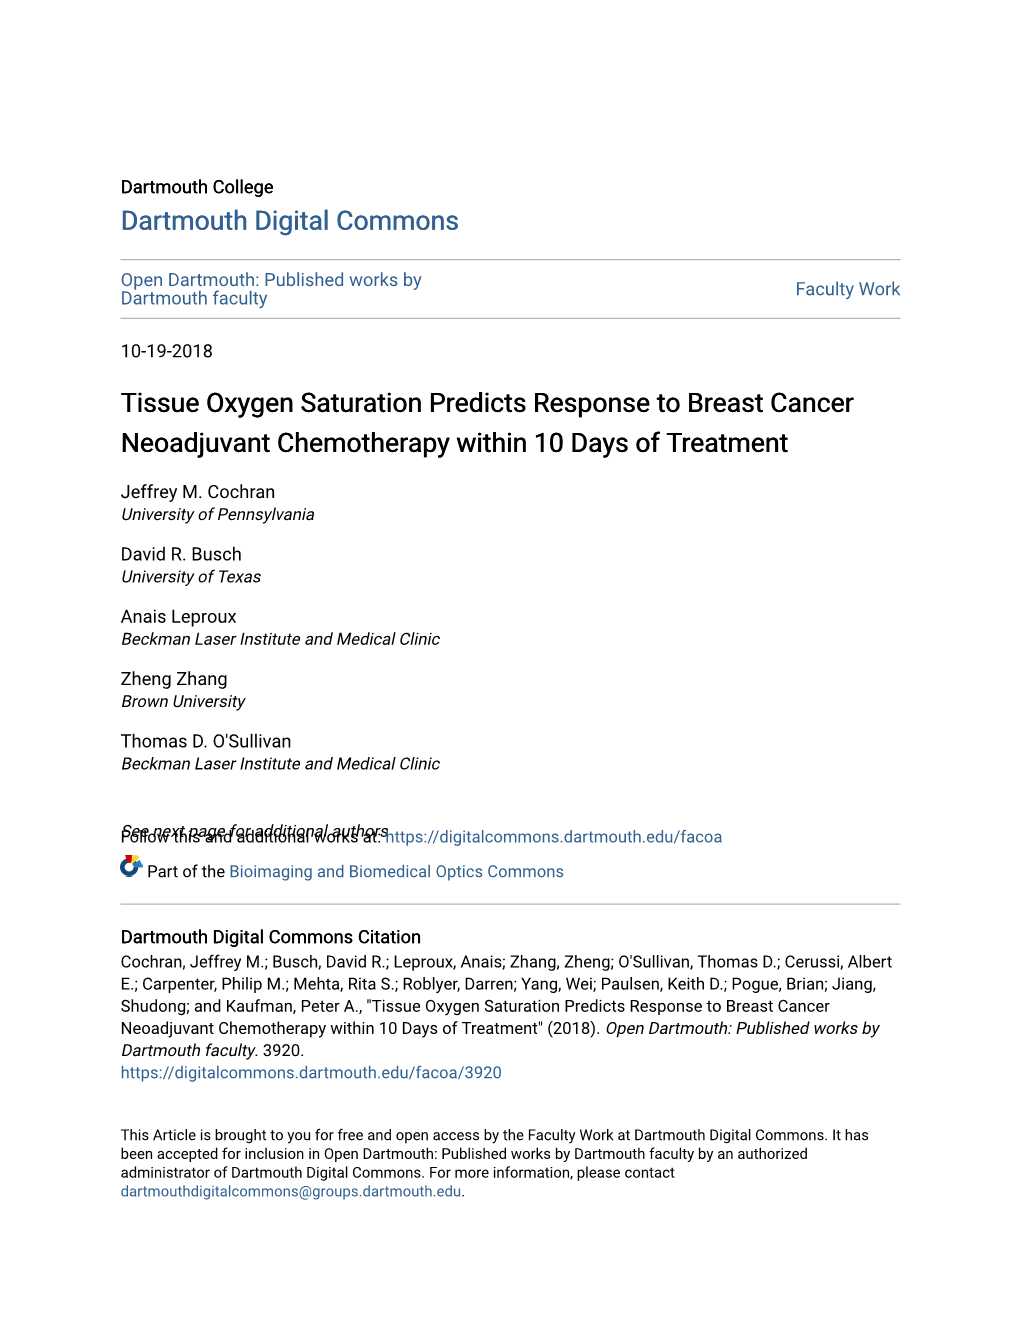 Tissue Oxygen Saturation Predicts Response to Breast Cancer Neoadjuvant Chemotherapy Within 10 Days of Treatment